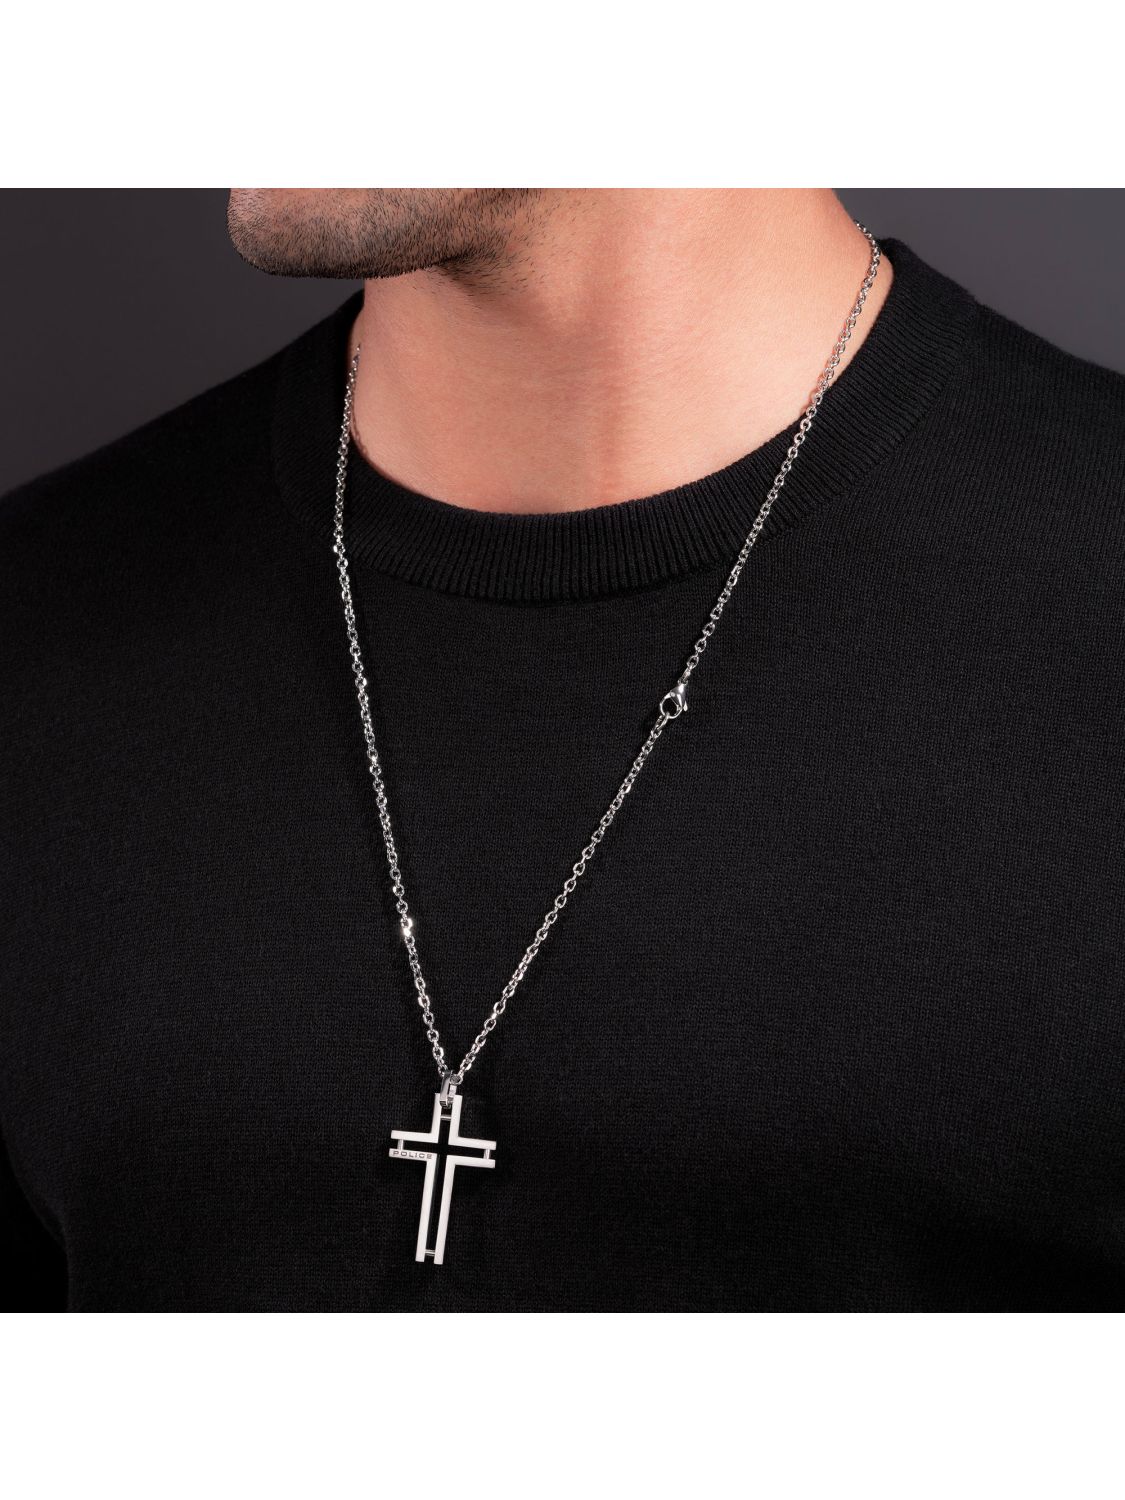 Framed Necklace uhrcenter Steel Cross Men\'s with • PEAGN0005305 Police Stainless